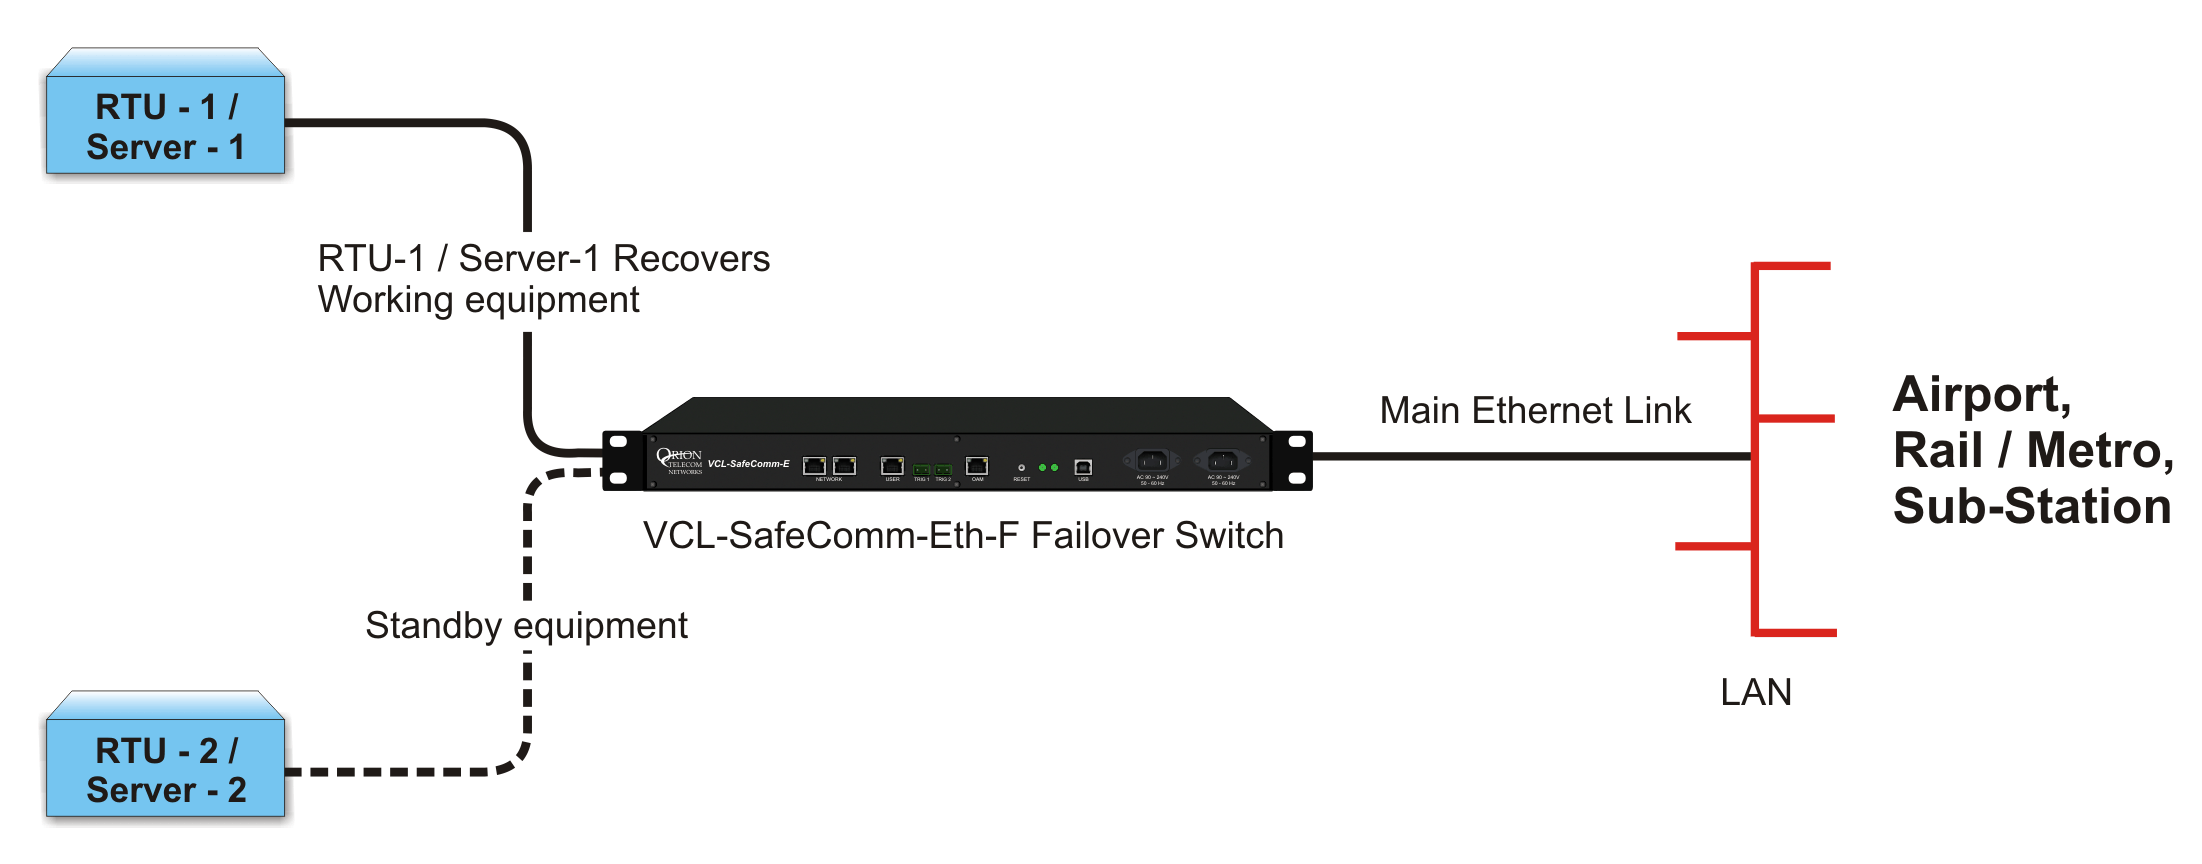 Equipment 1 recovers - Ethernet link automatically reverts and reconnects to RTU-1 / Server-1